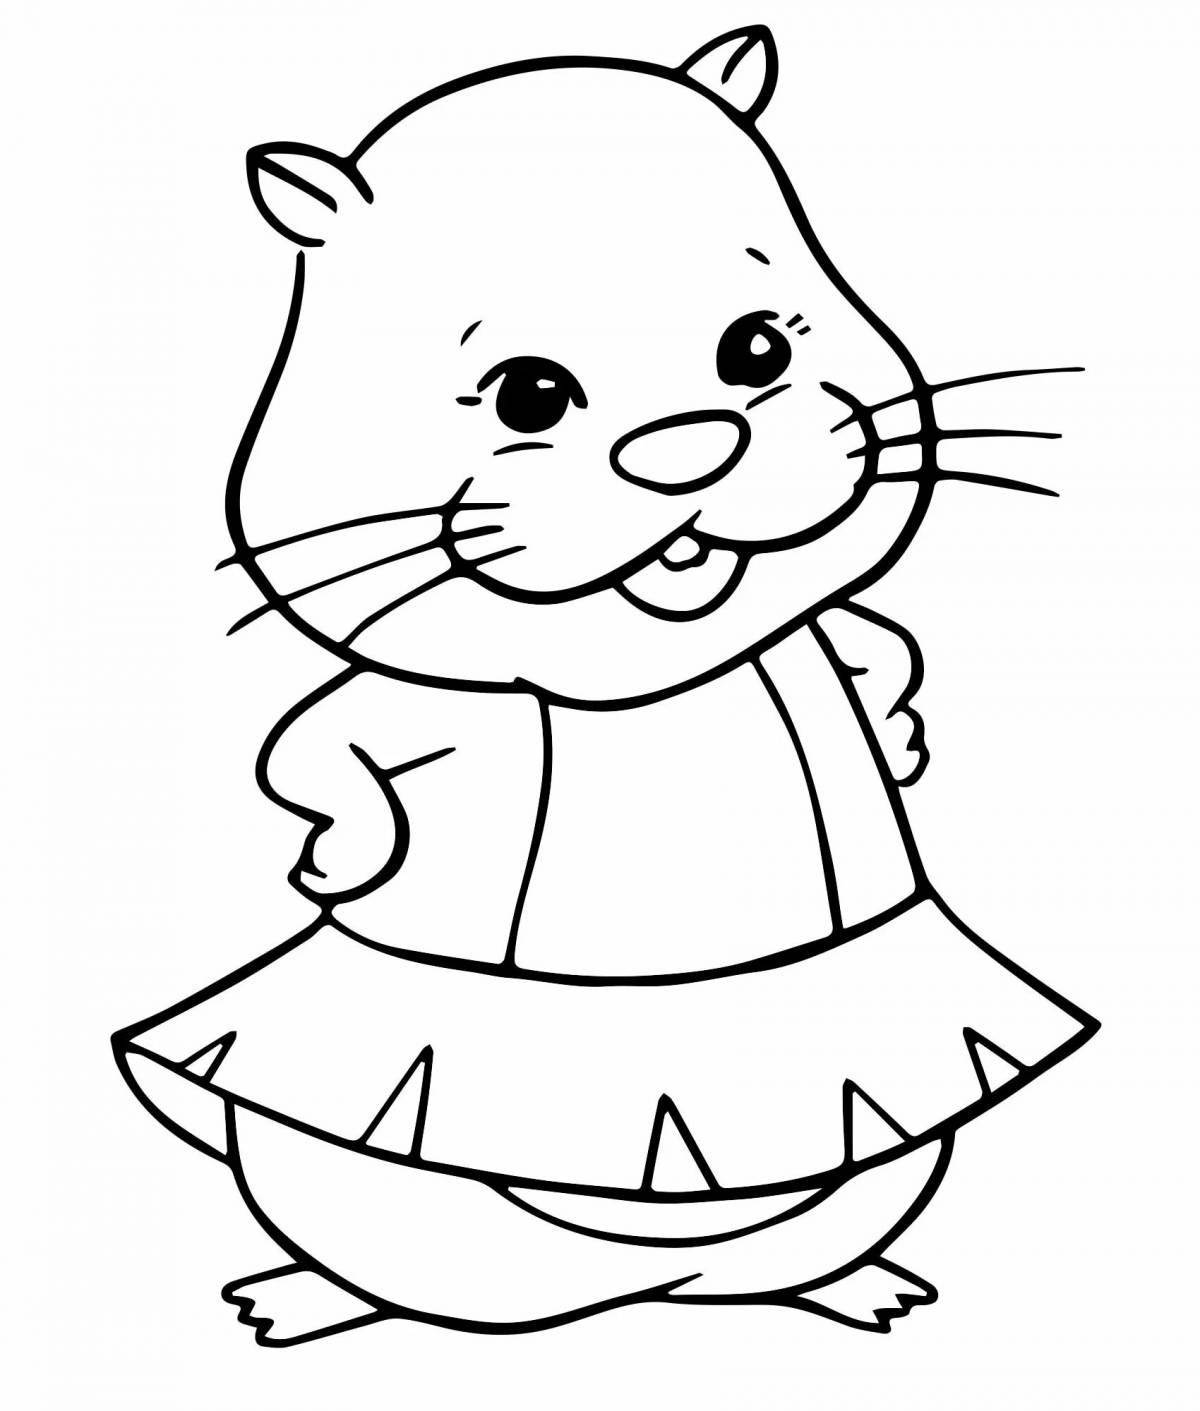 Coloring pages for hamster girls